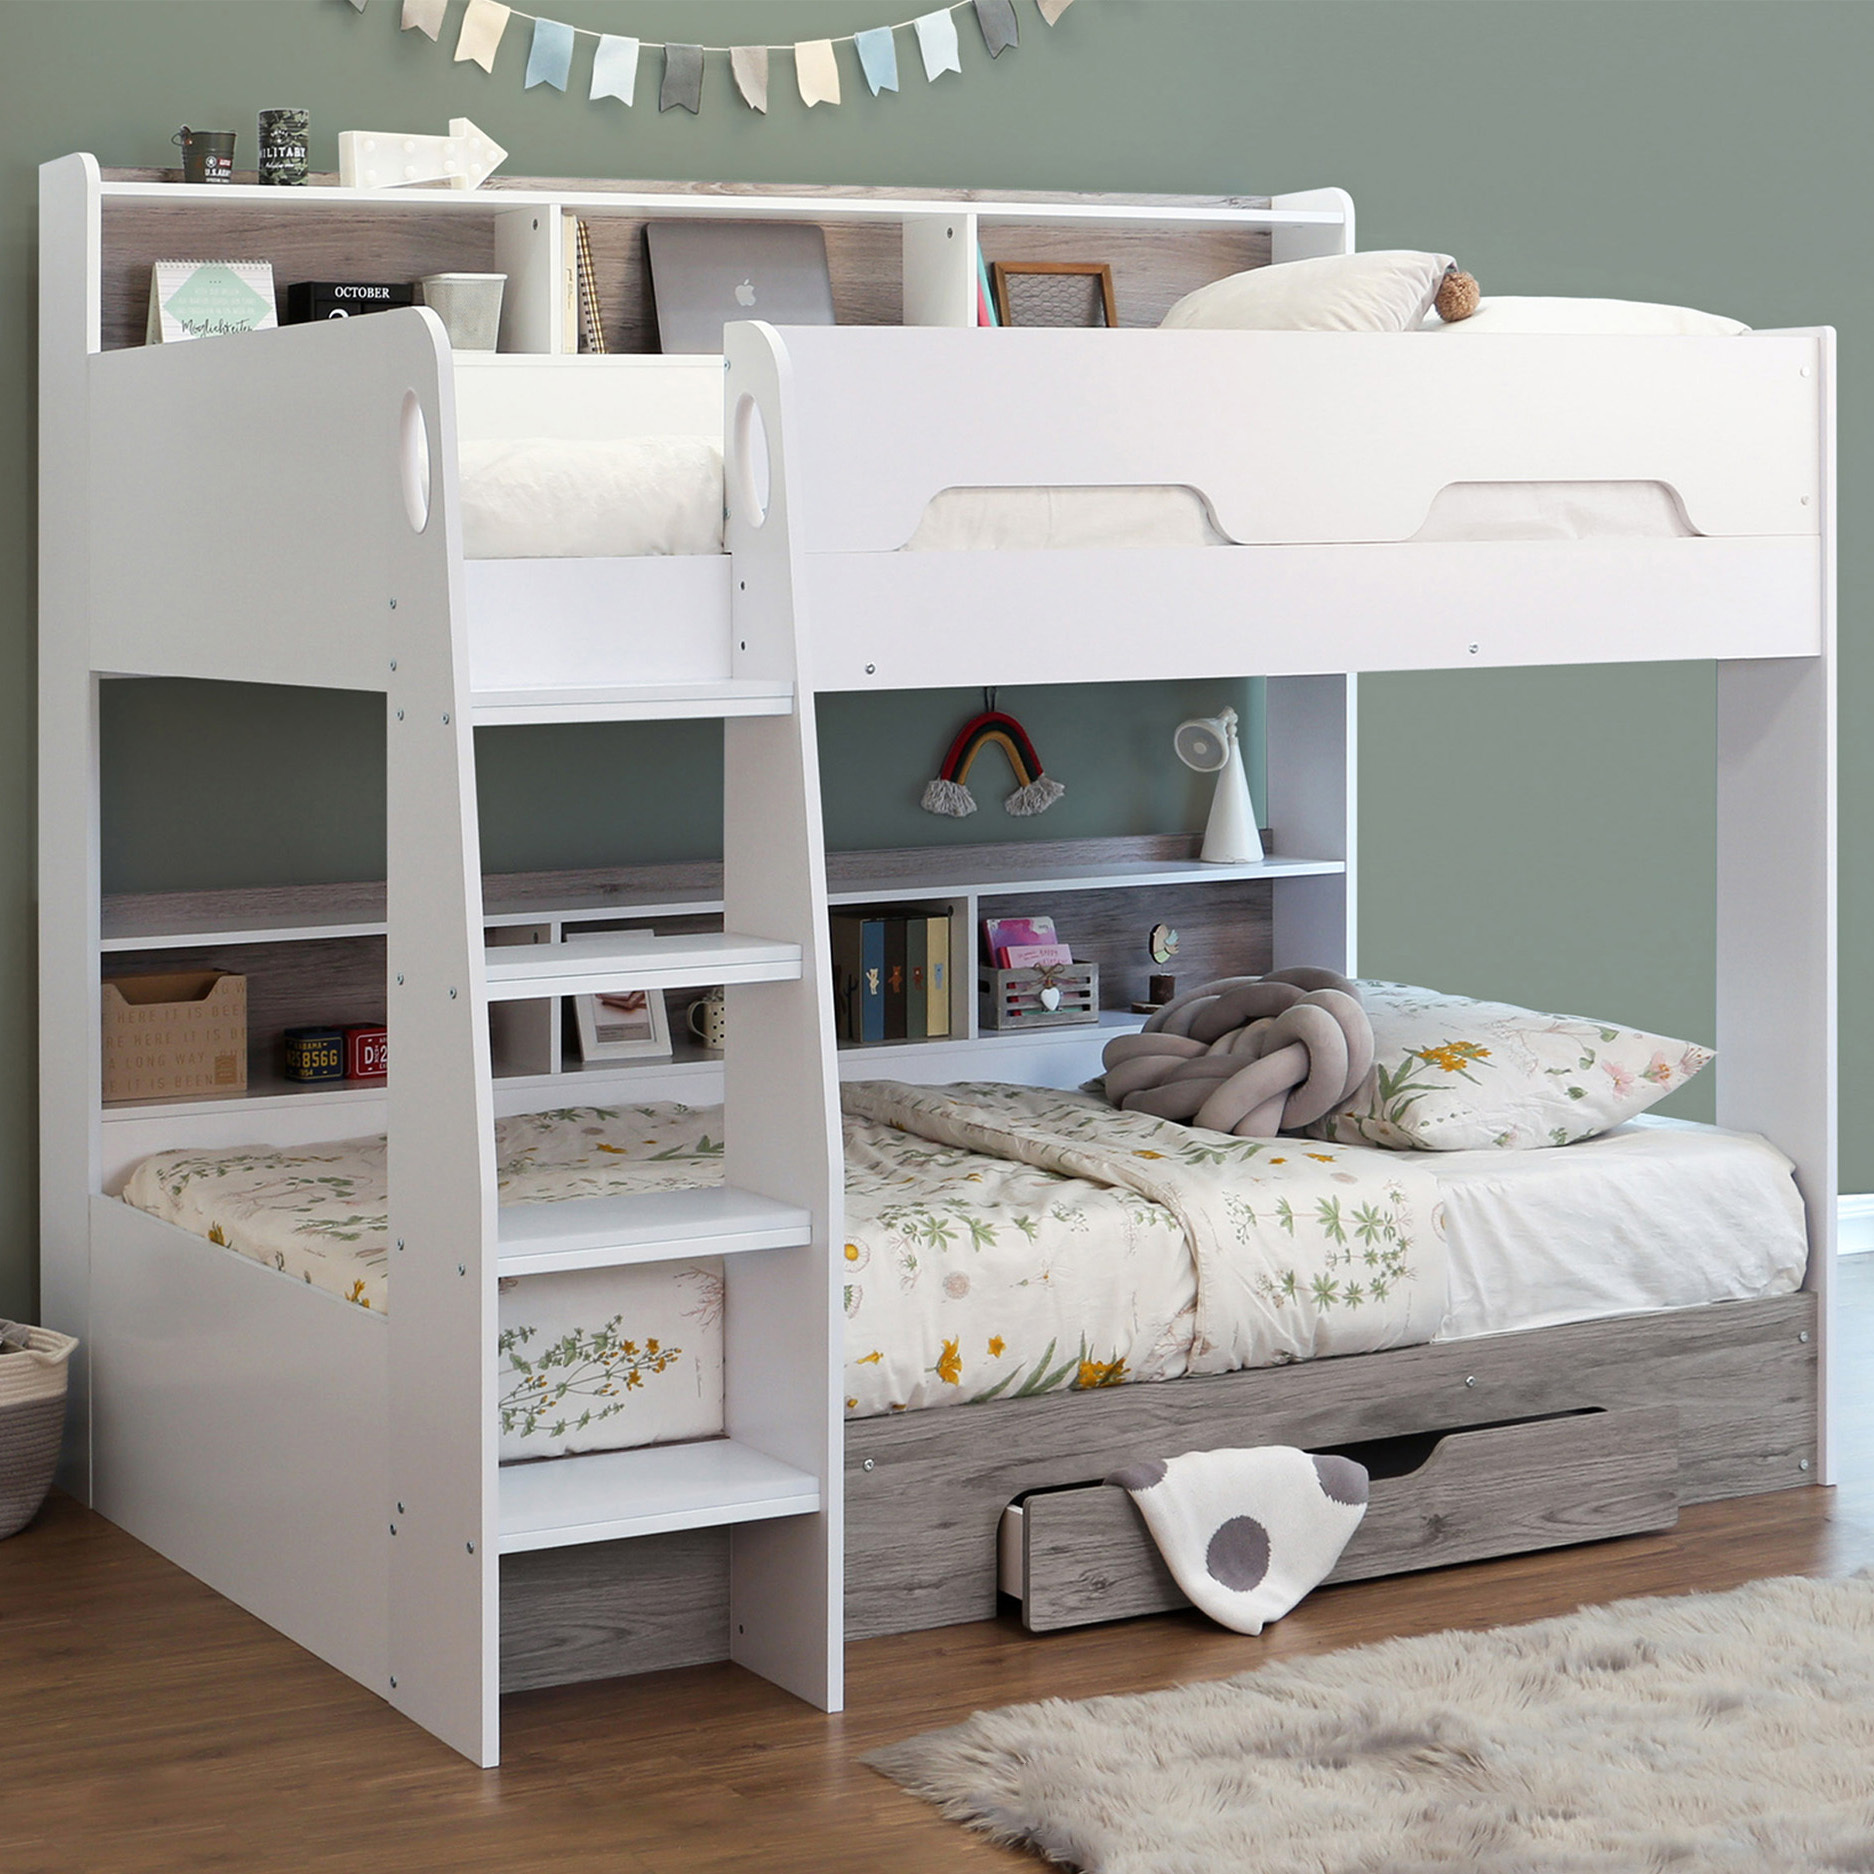 Vic Furniture Castel Single Bunk Bed, Queen Bed With Bunk Above Australia